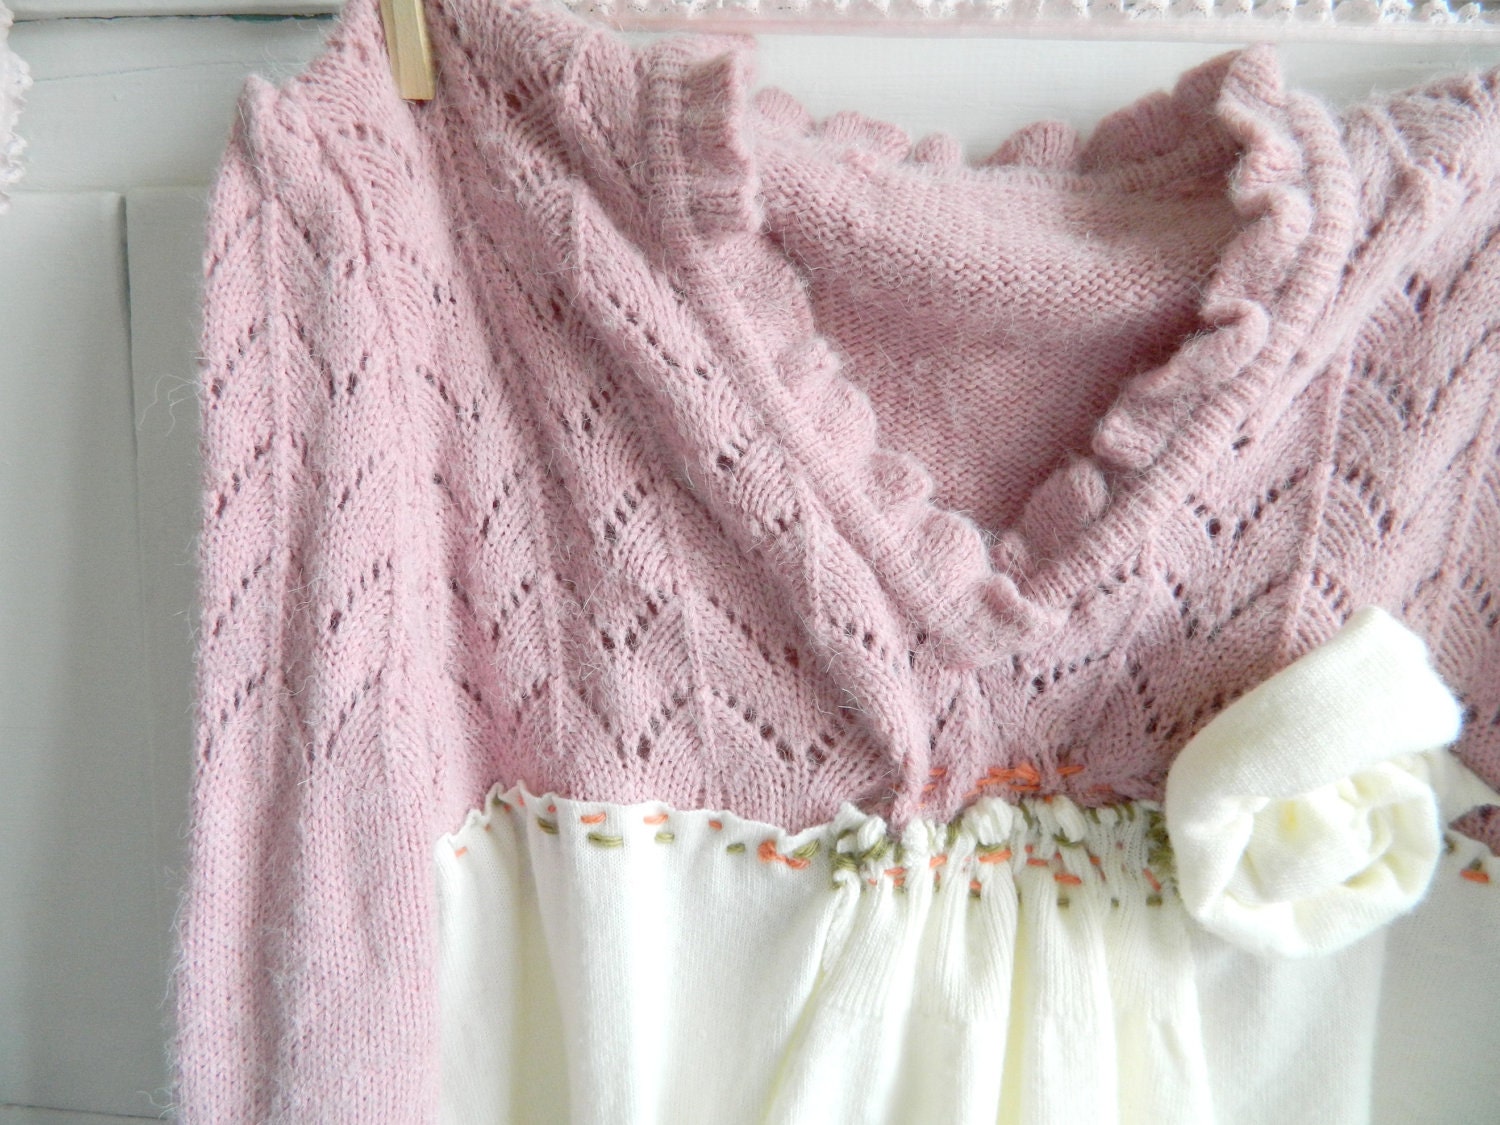 Mary, Mary-Handsewn pink and cream vintage cashmere sweater-size small/medium